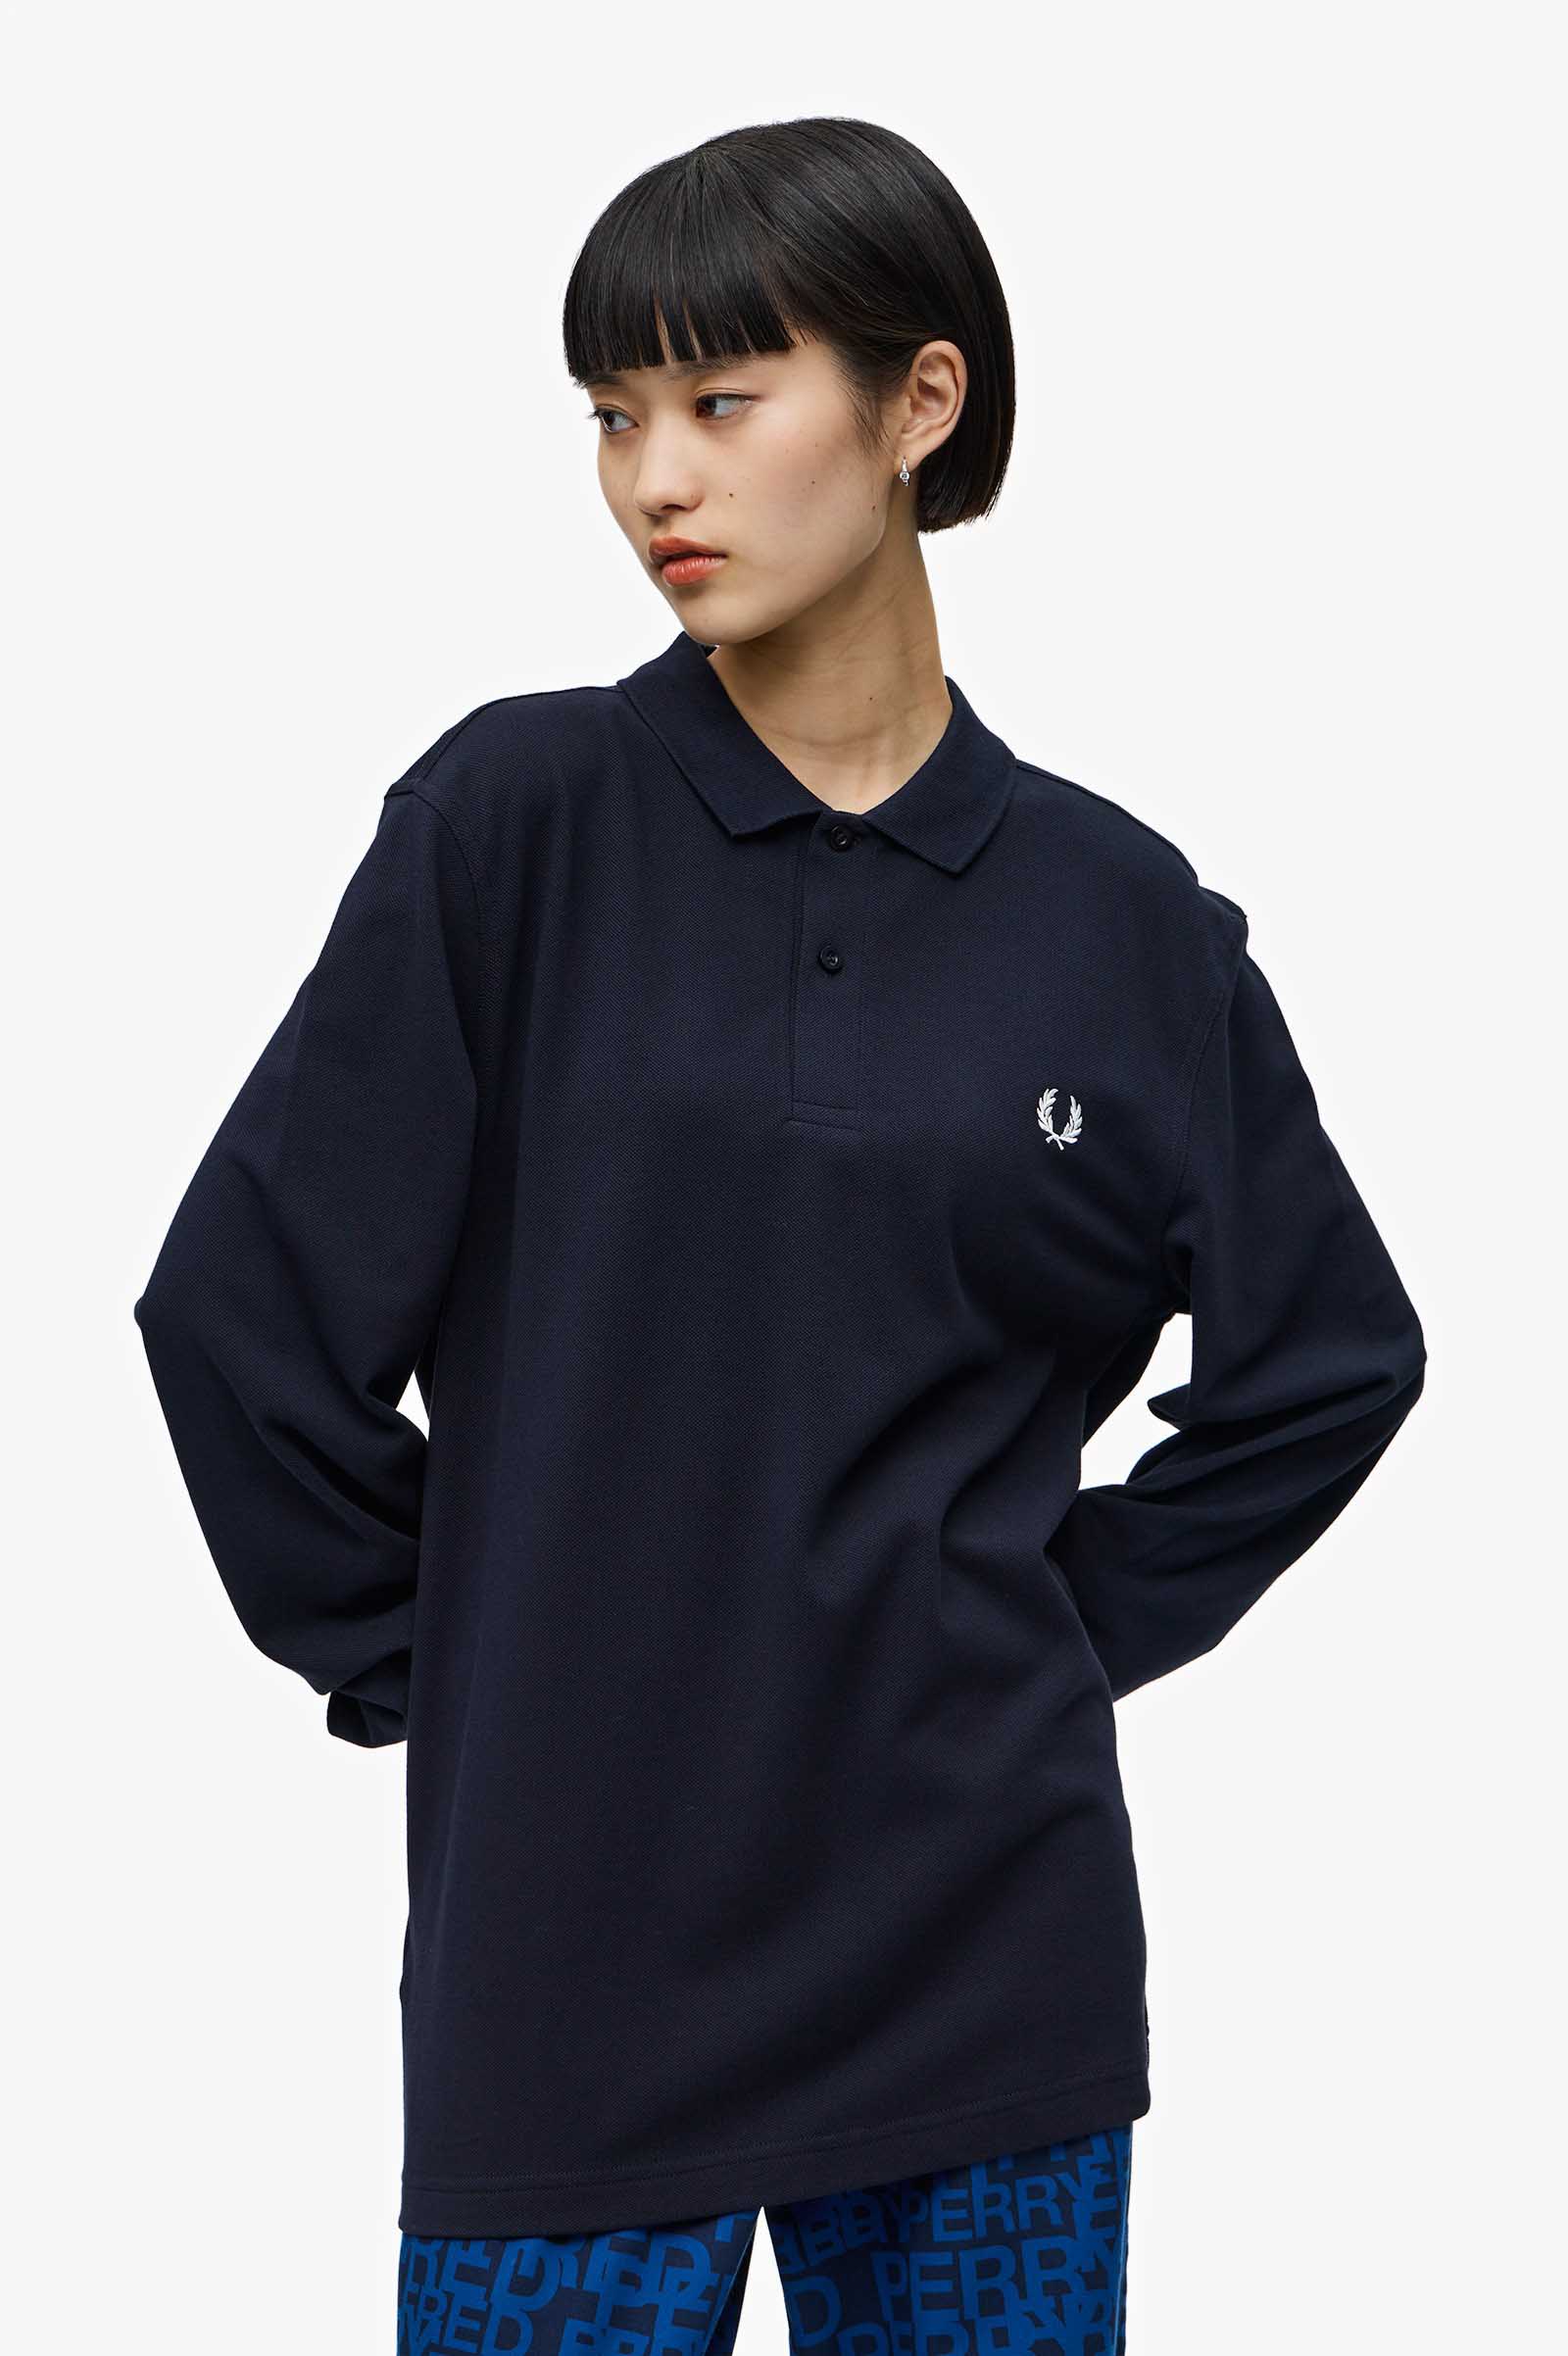 The Fred Perry Shirt - M6006